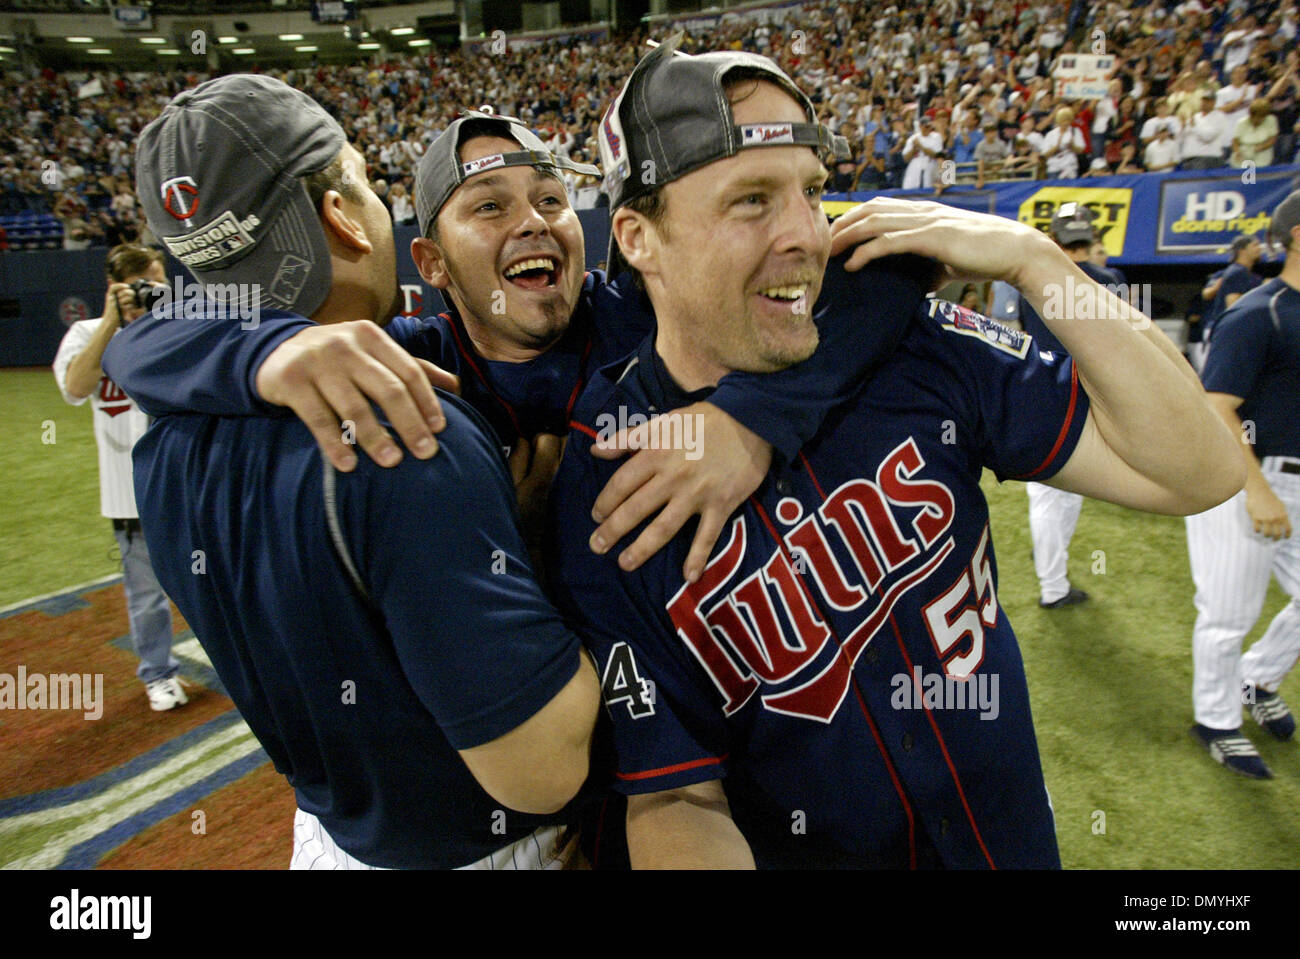 Oct 01, 2006; Minneapolis, MN, USA; The Minesota Twins celebrate winning their division after Detroit's loss to Kansas City duirng the conclusion of their game against the Chicago White Sox at the Metordome in Minneapolis, Minnesota, Sunday, October 1, 2006. The Twins defeated the White Sox 5-1.  Mandatory Credit: Photo by Marlin Levison/Minneapolis Star T/ZUMA Press. (©) Copyright Stock Photo